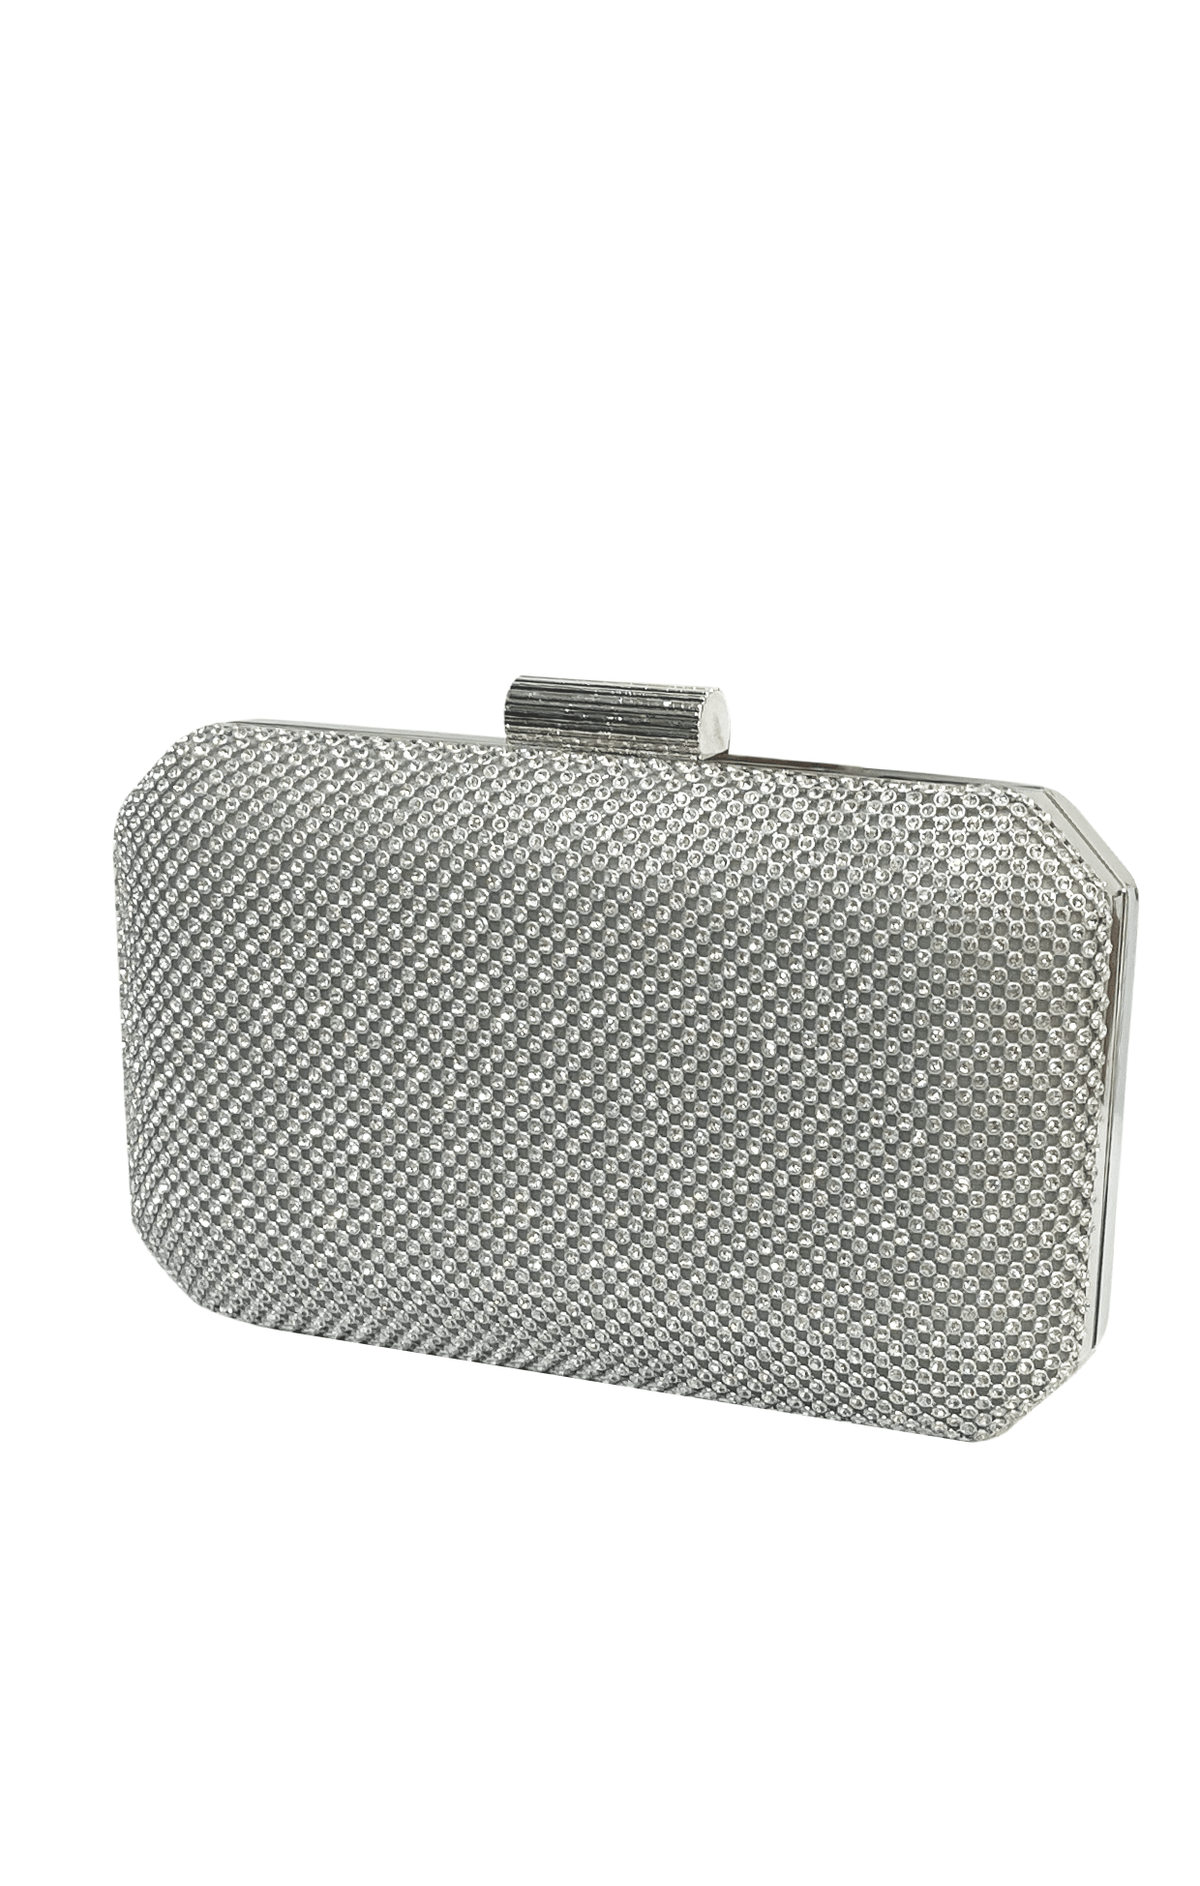 ACCESSORIES Bags Clutches One Size / Silver DIAMANTE MESH STRUCTURED CLUTCH IN SILVER